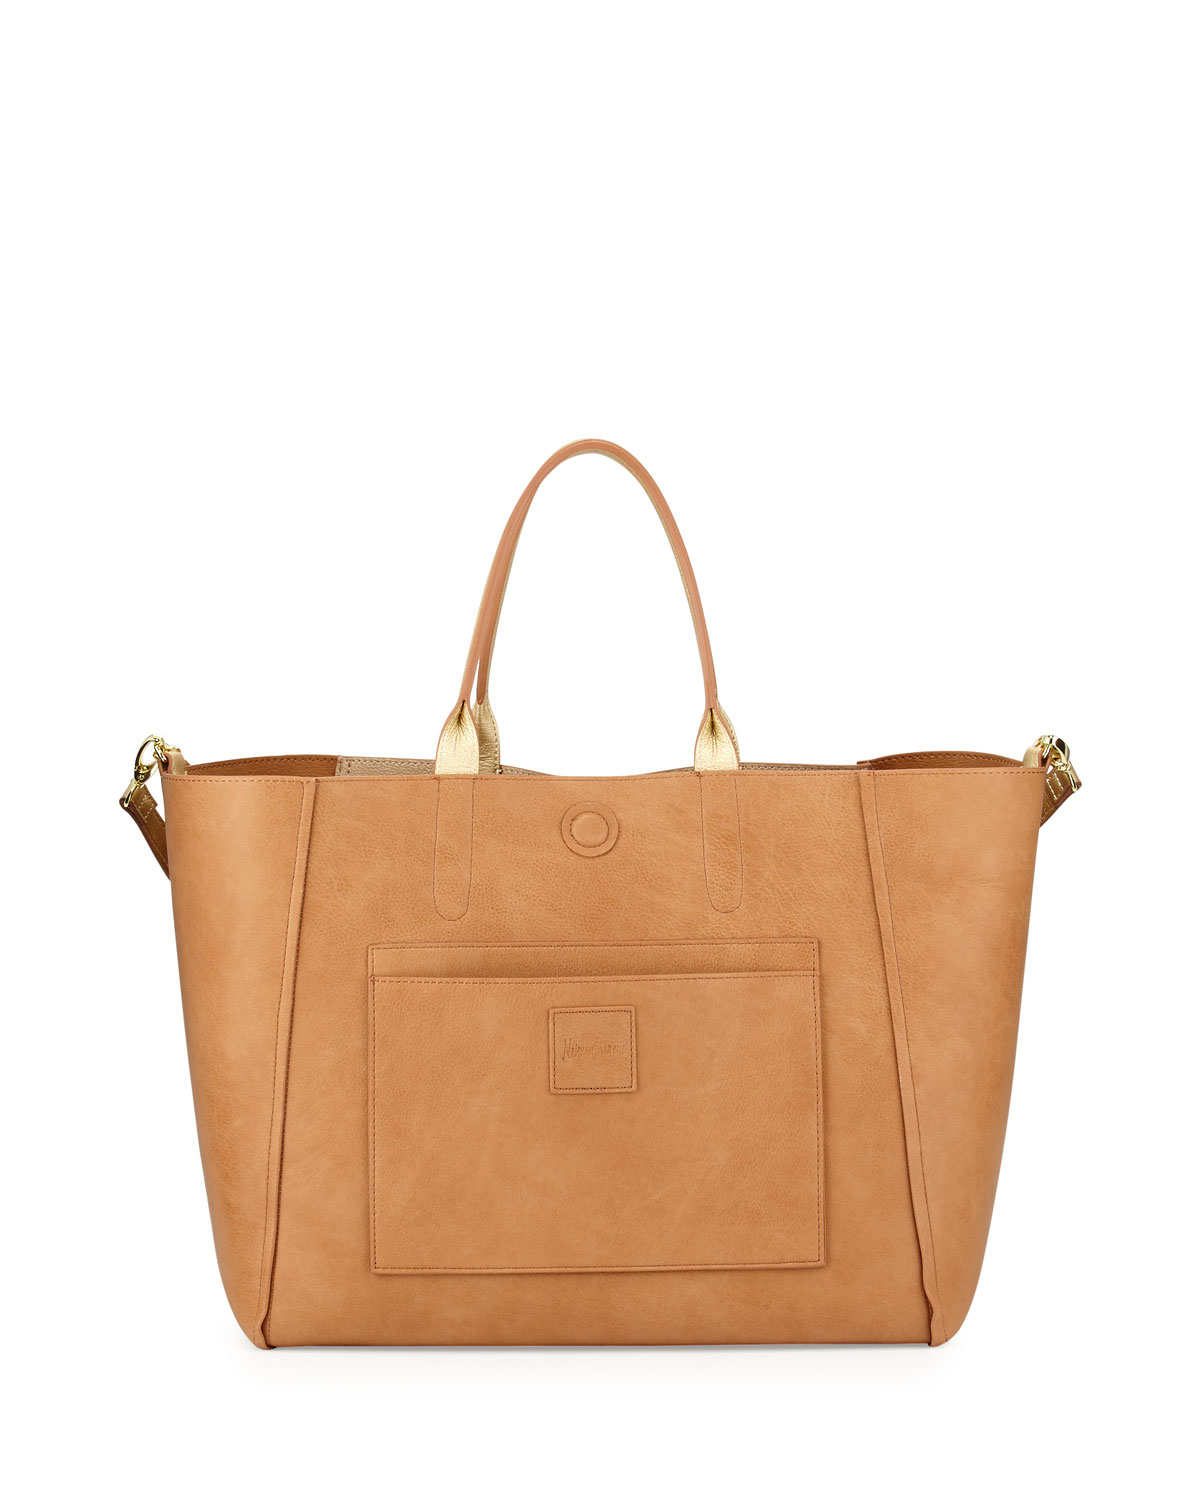 Lyst - Neiman Marcus Reversible Faux-leather Tote Bag in Natural